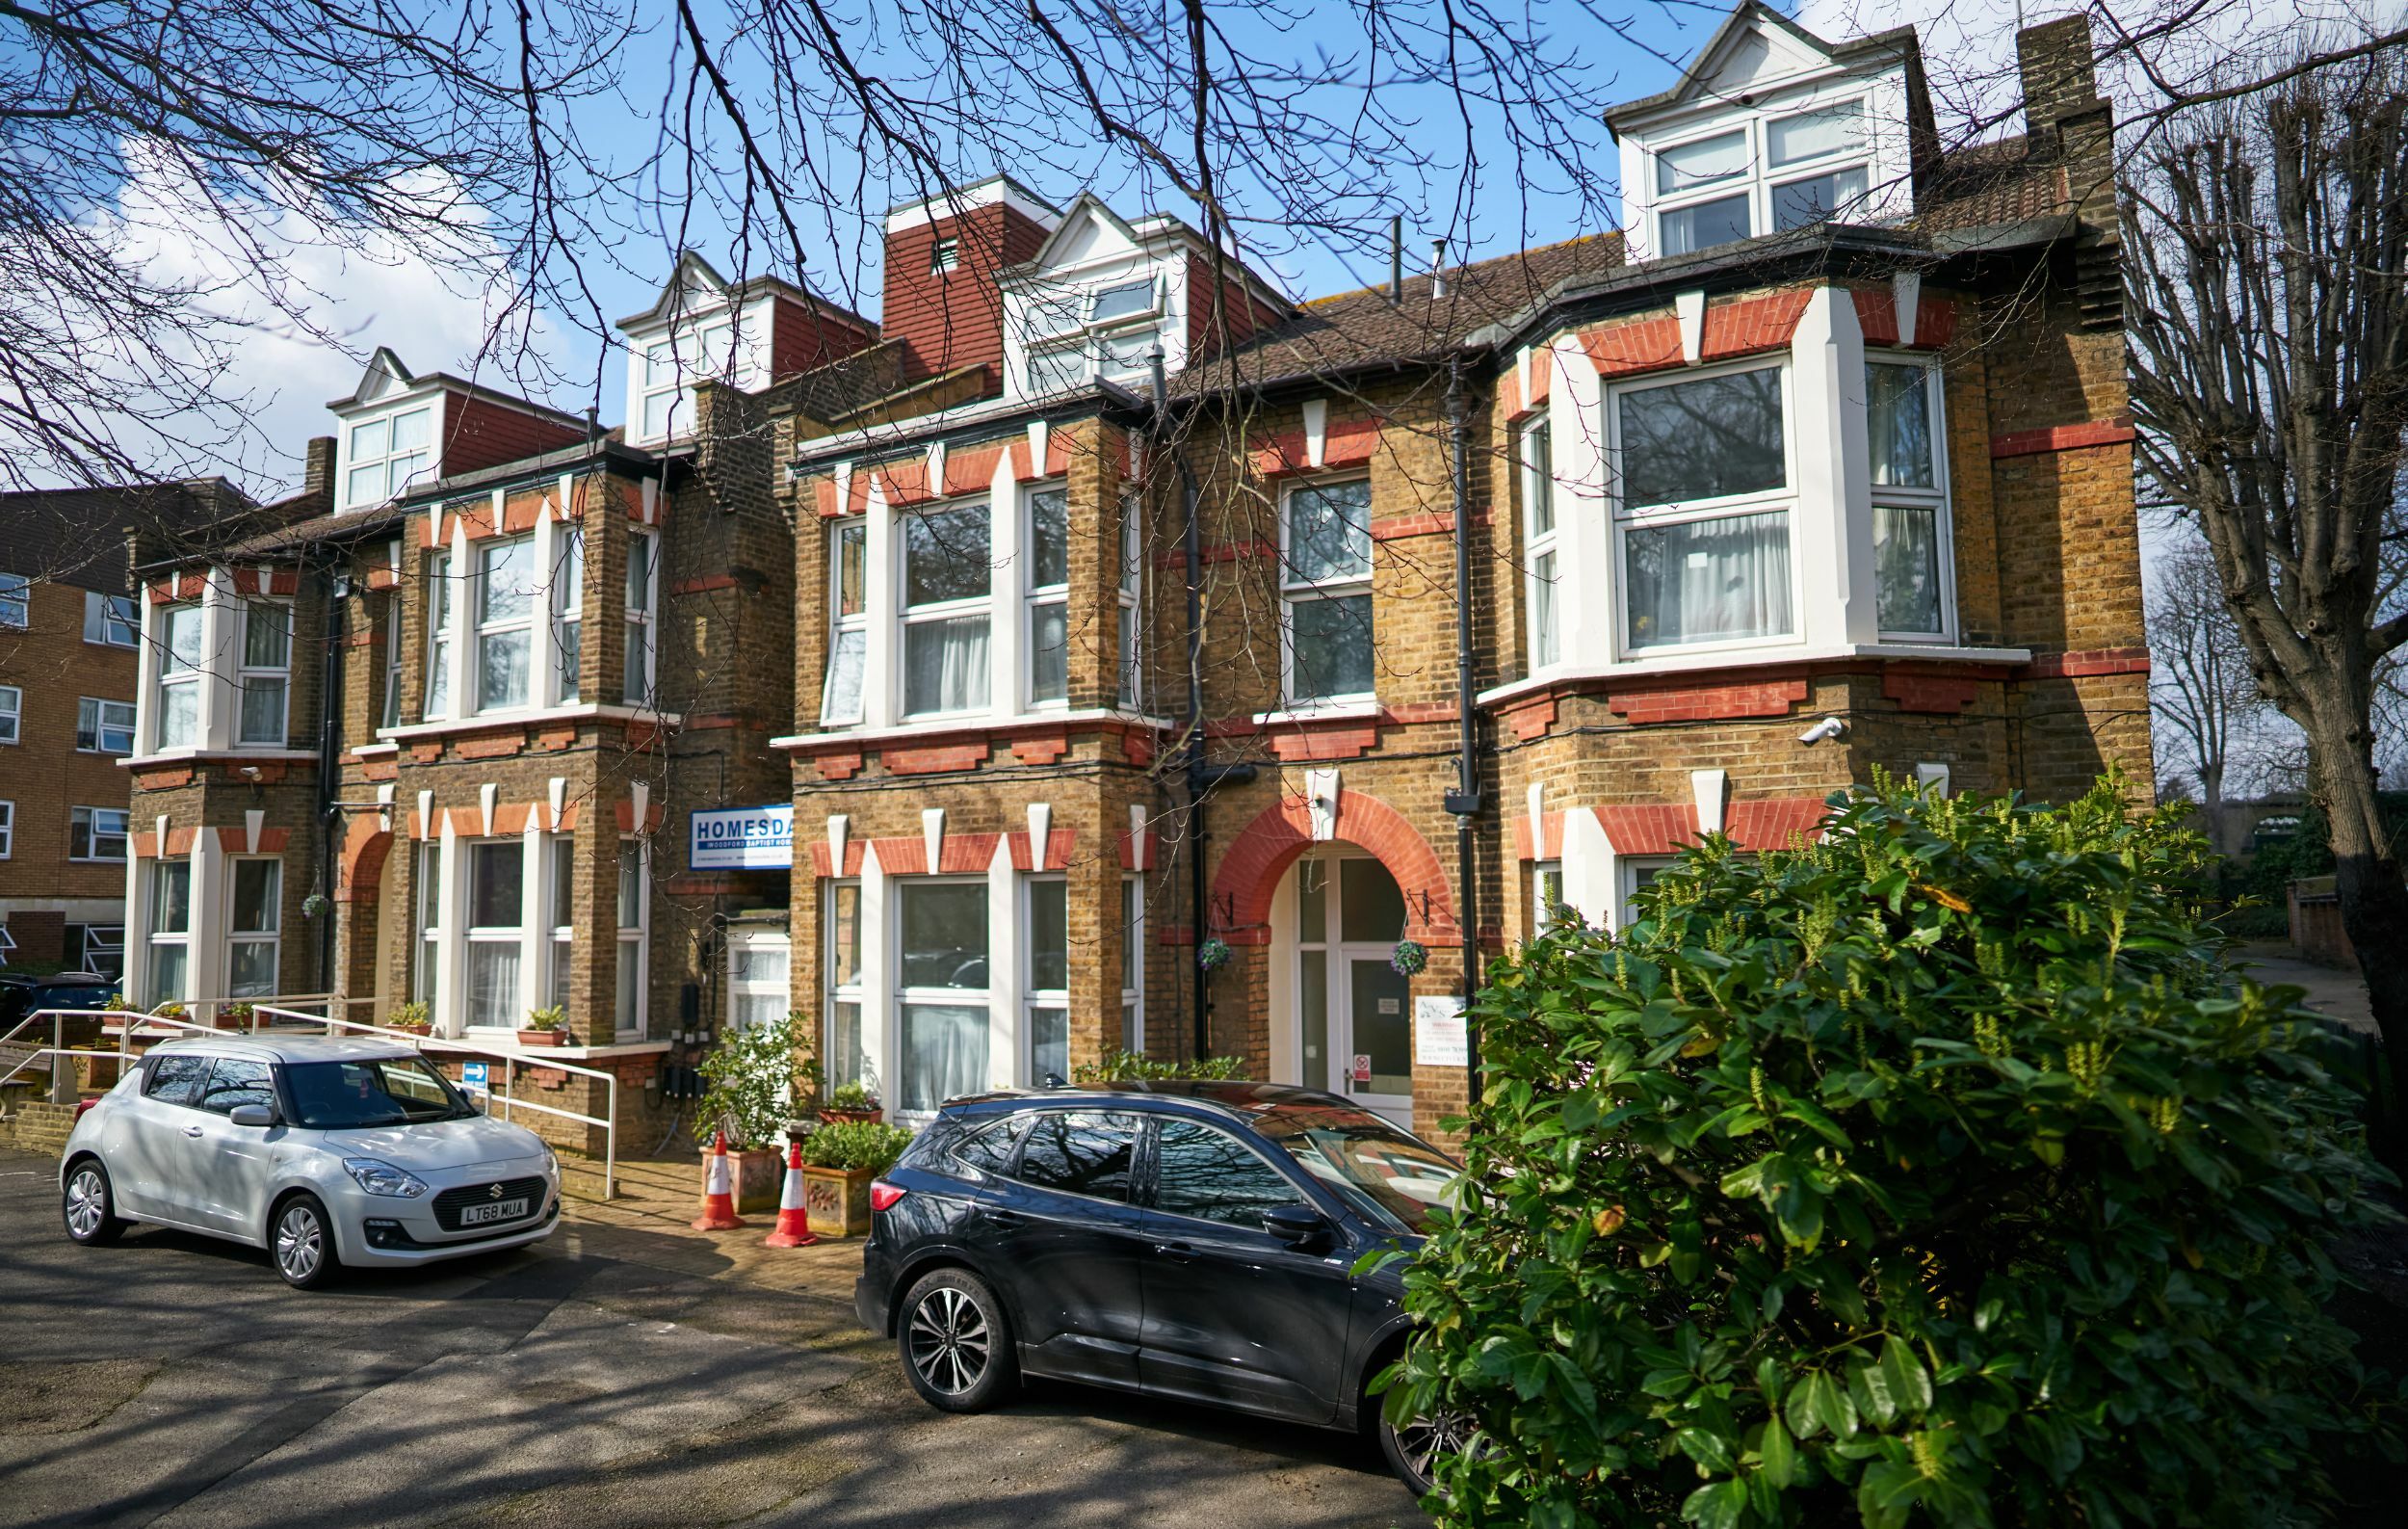 Homesdale Care Home Wanstead, London